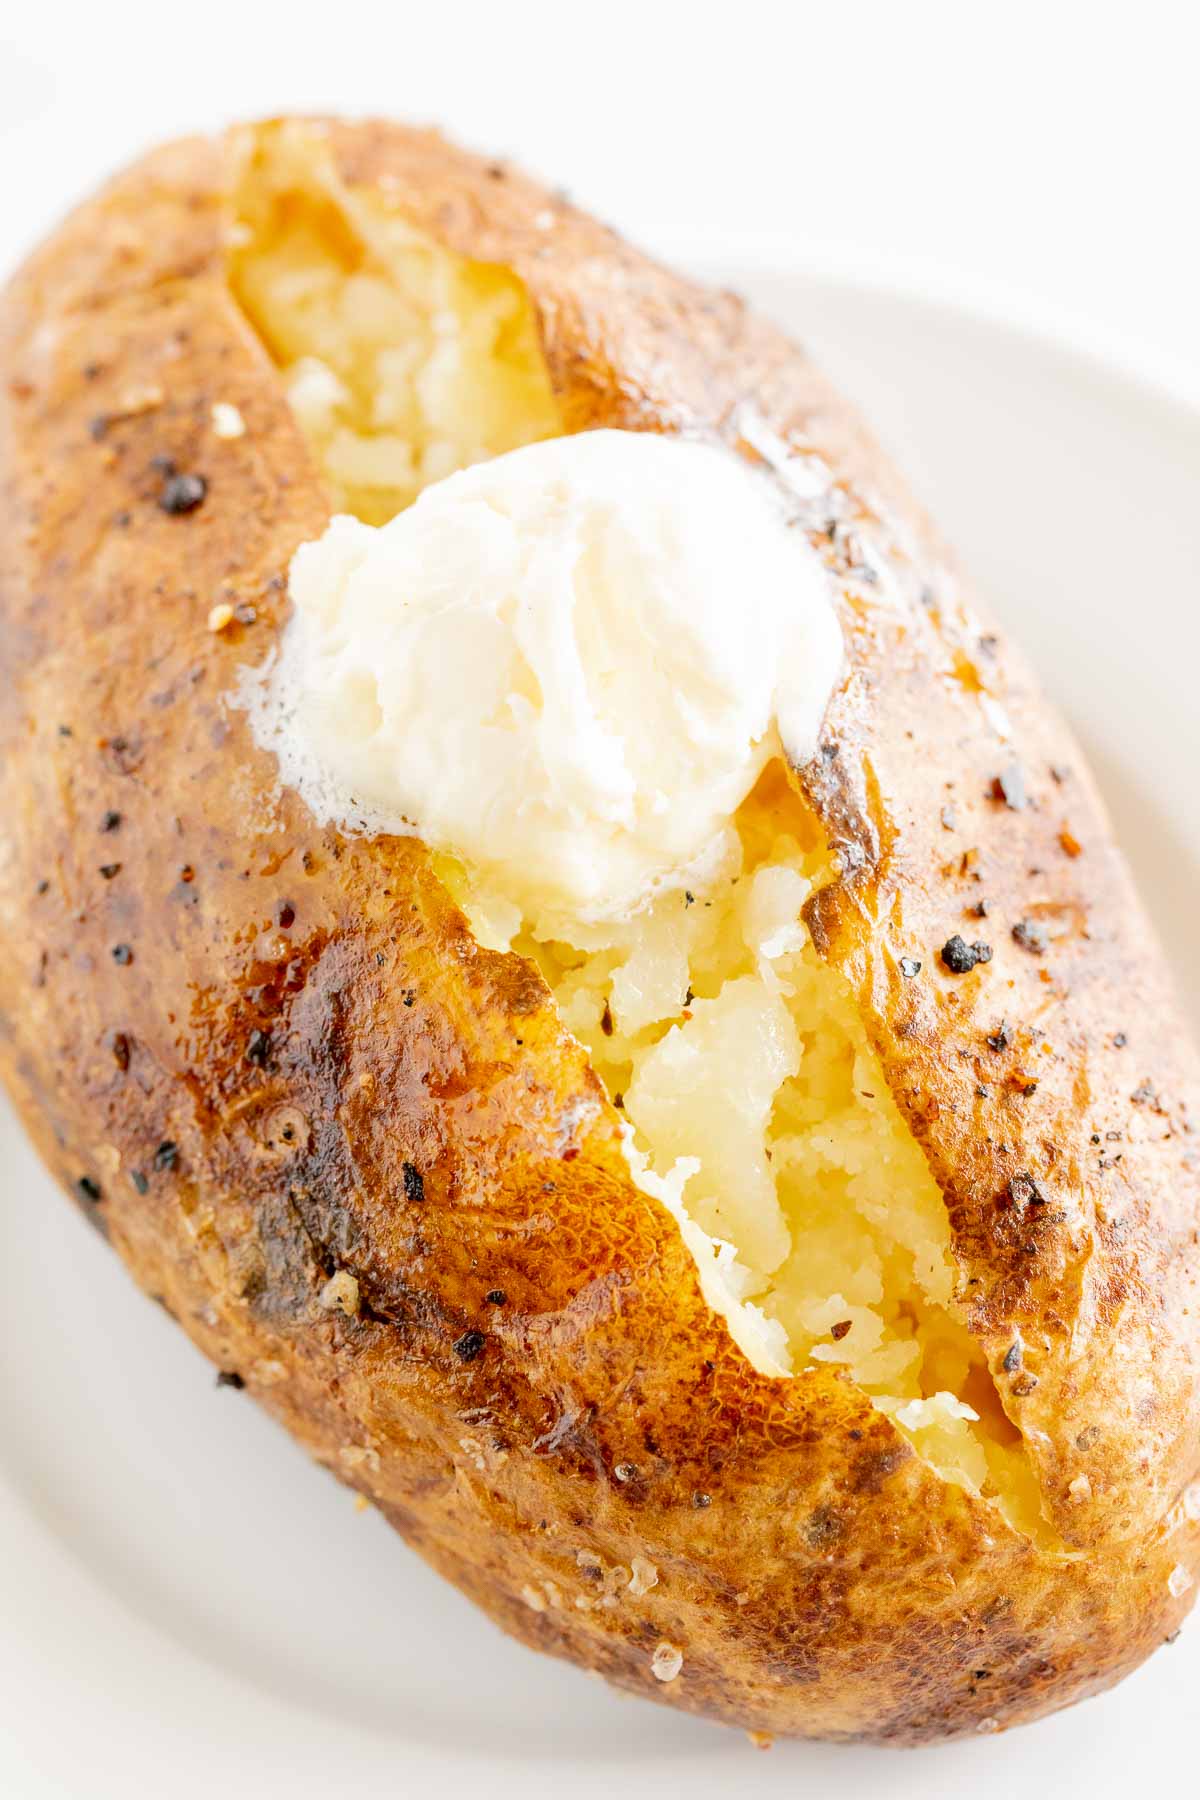 A grilled baked potato on a white plate.